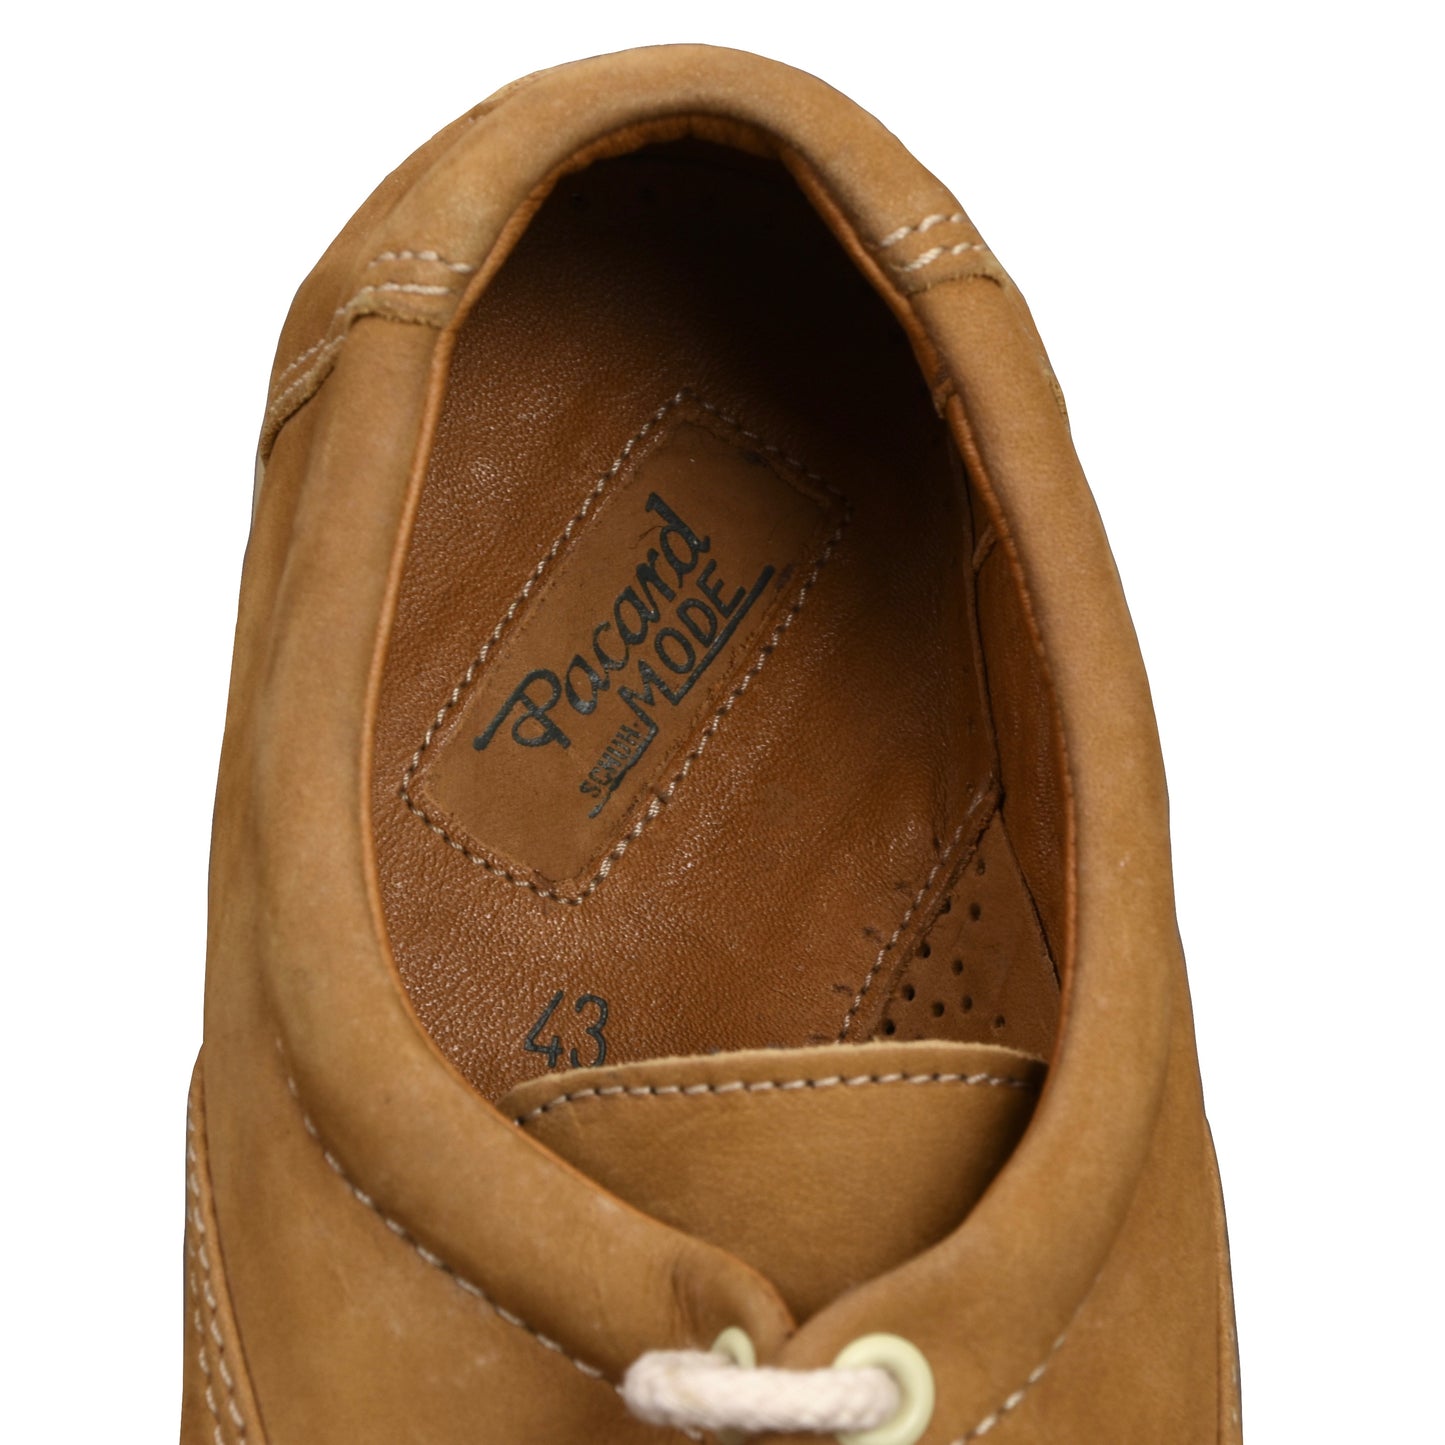 Pacard Nubuck Leather Boat Shoes Size 43 - Tobacco Brown